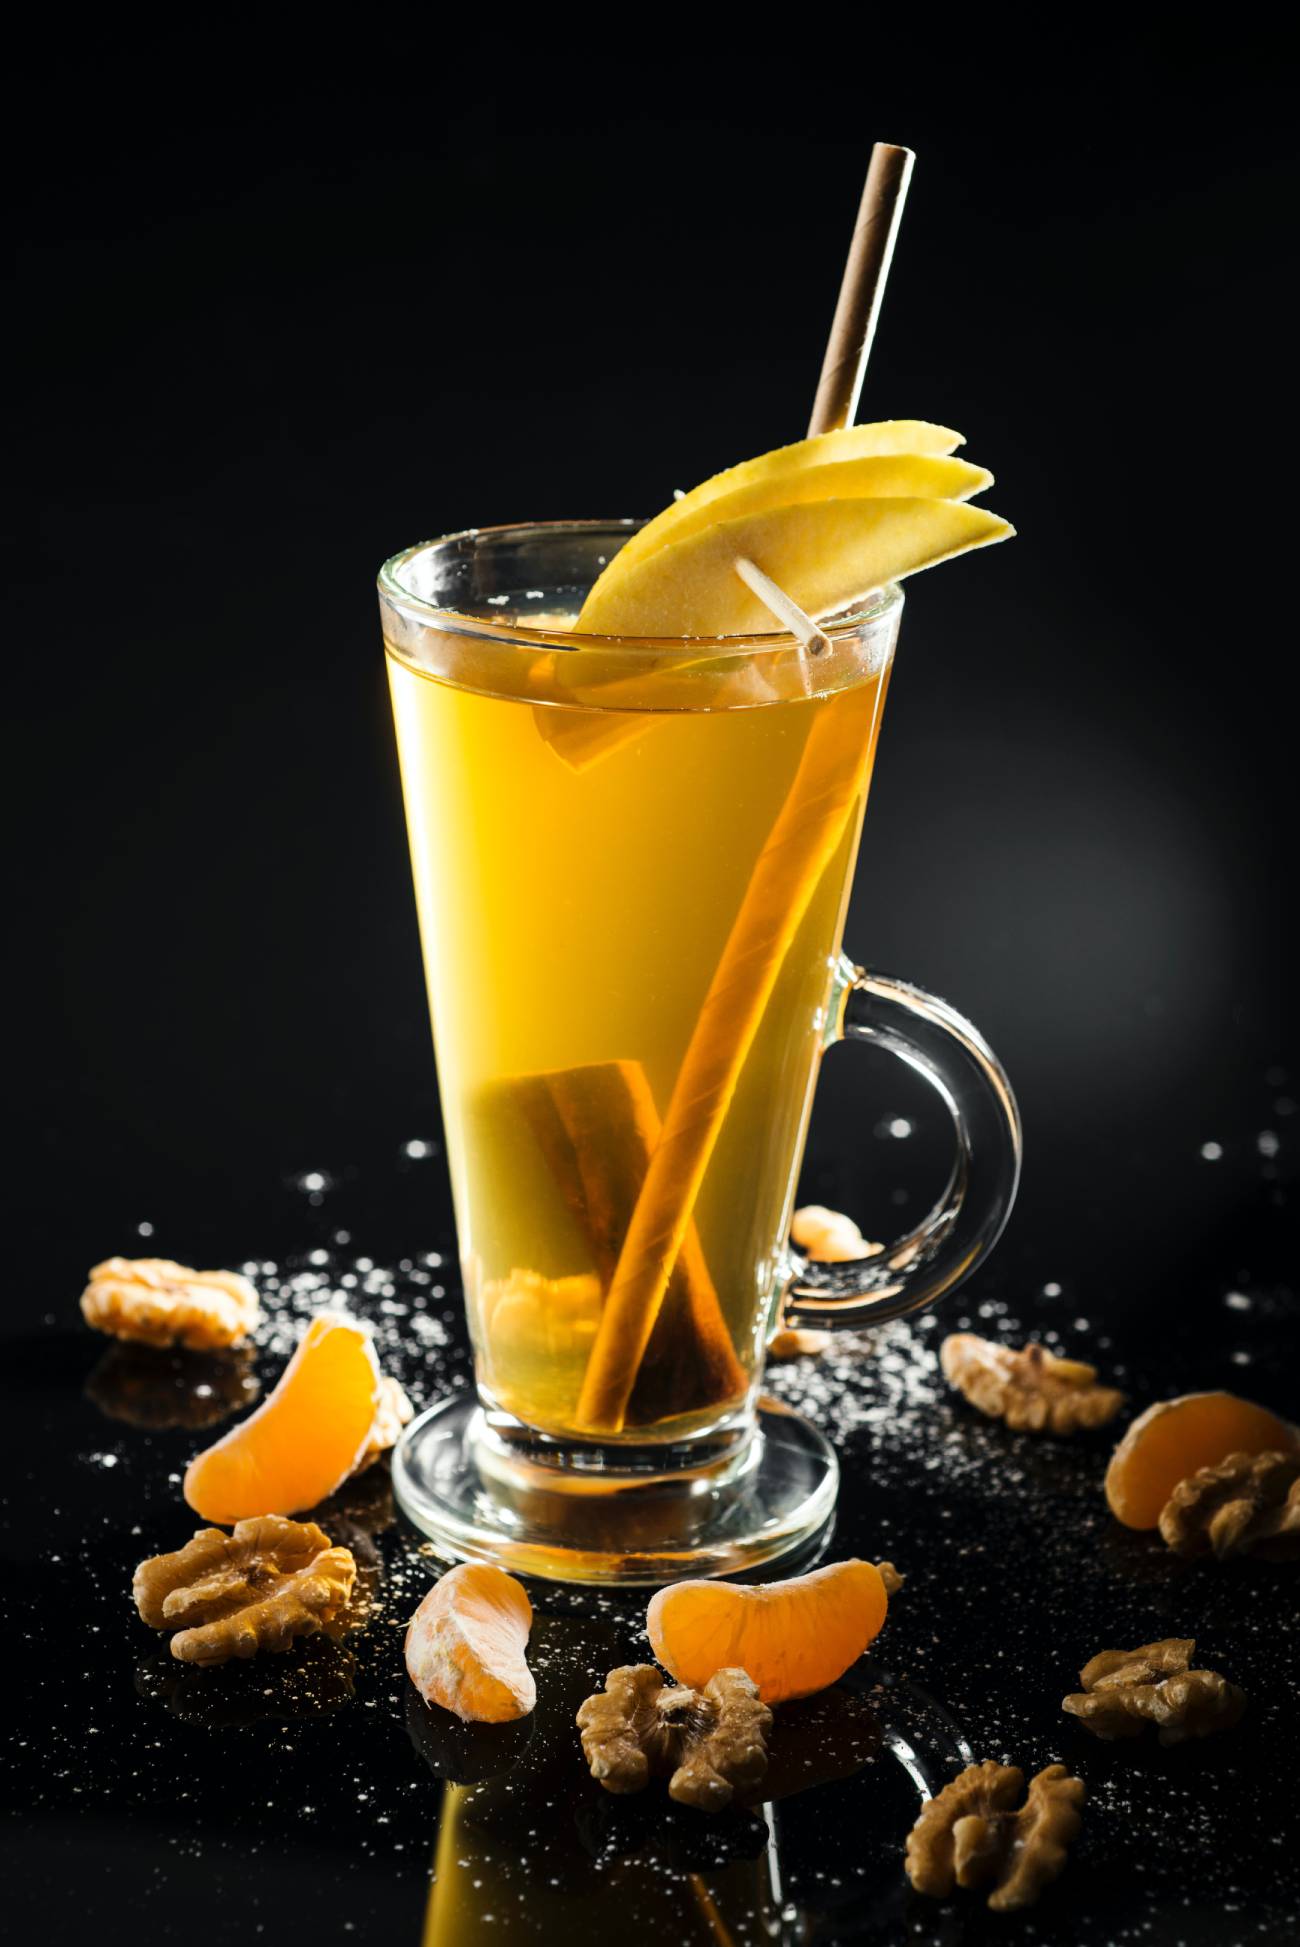 a hot toddy is the best holiday drink idea